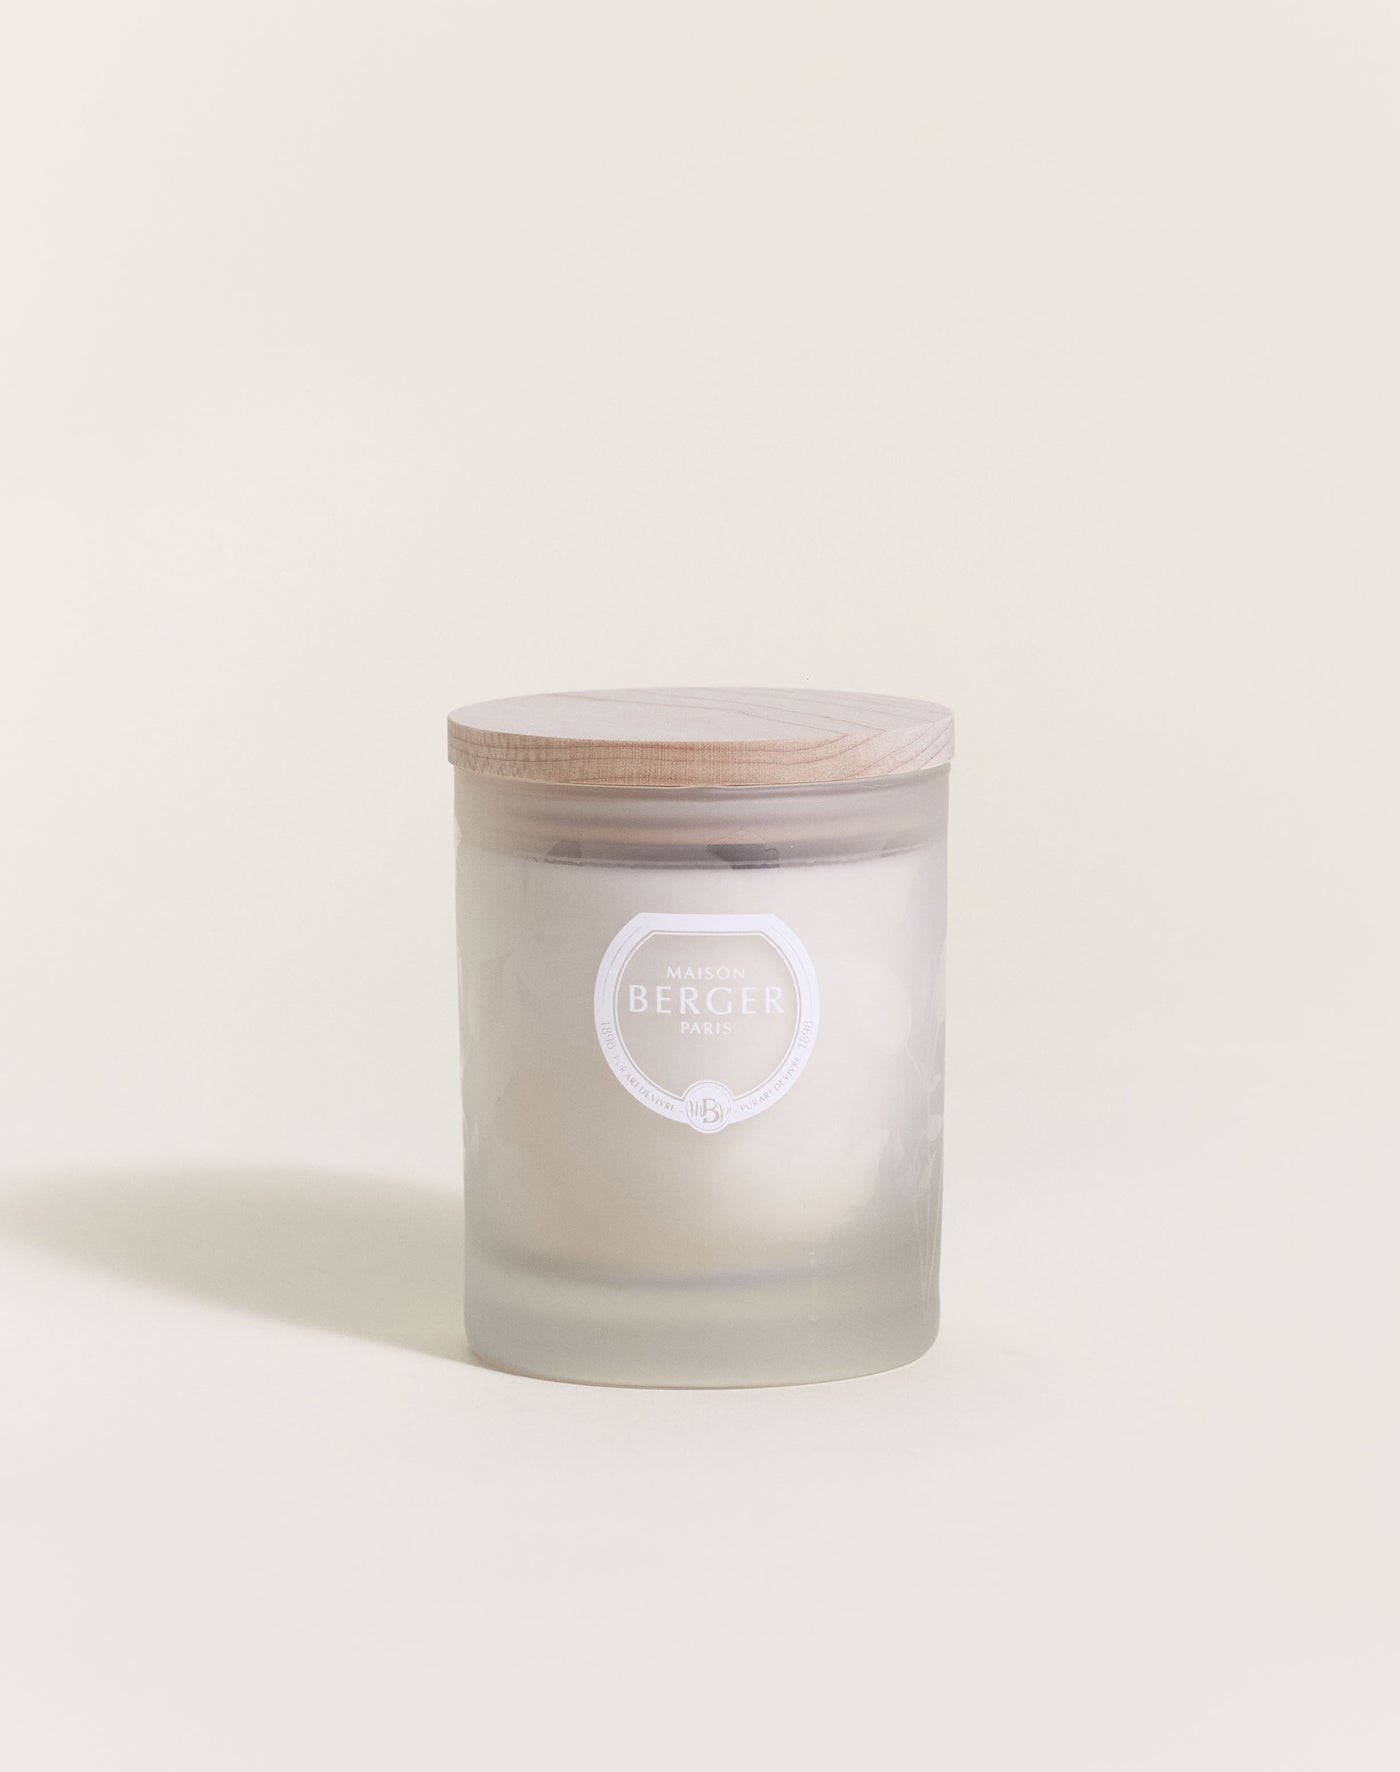 Aroma Energy Scented Candle